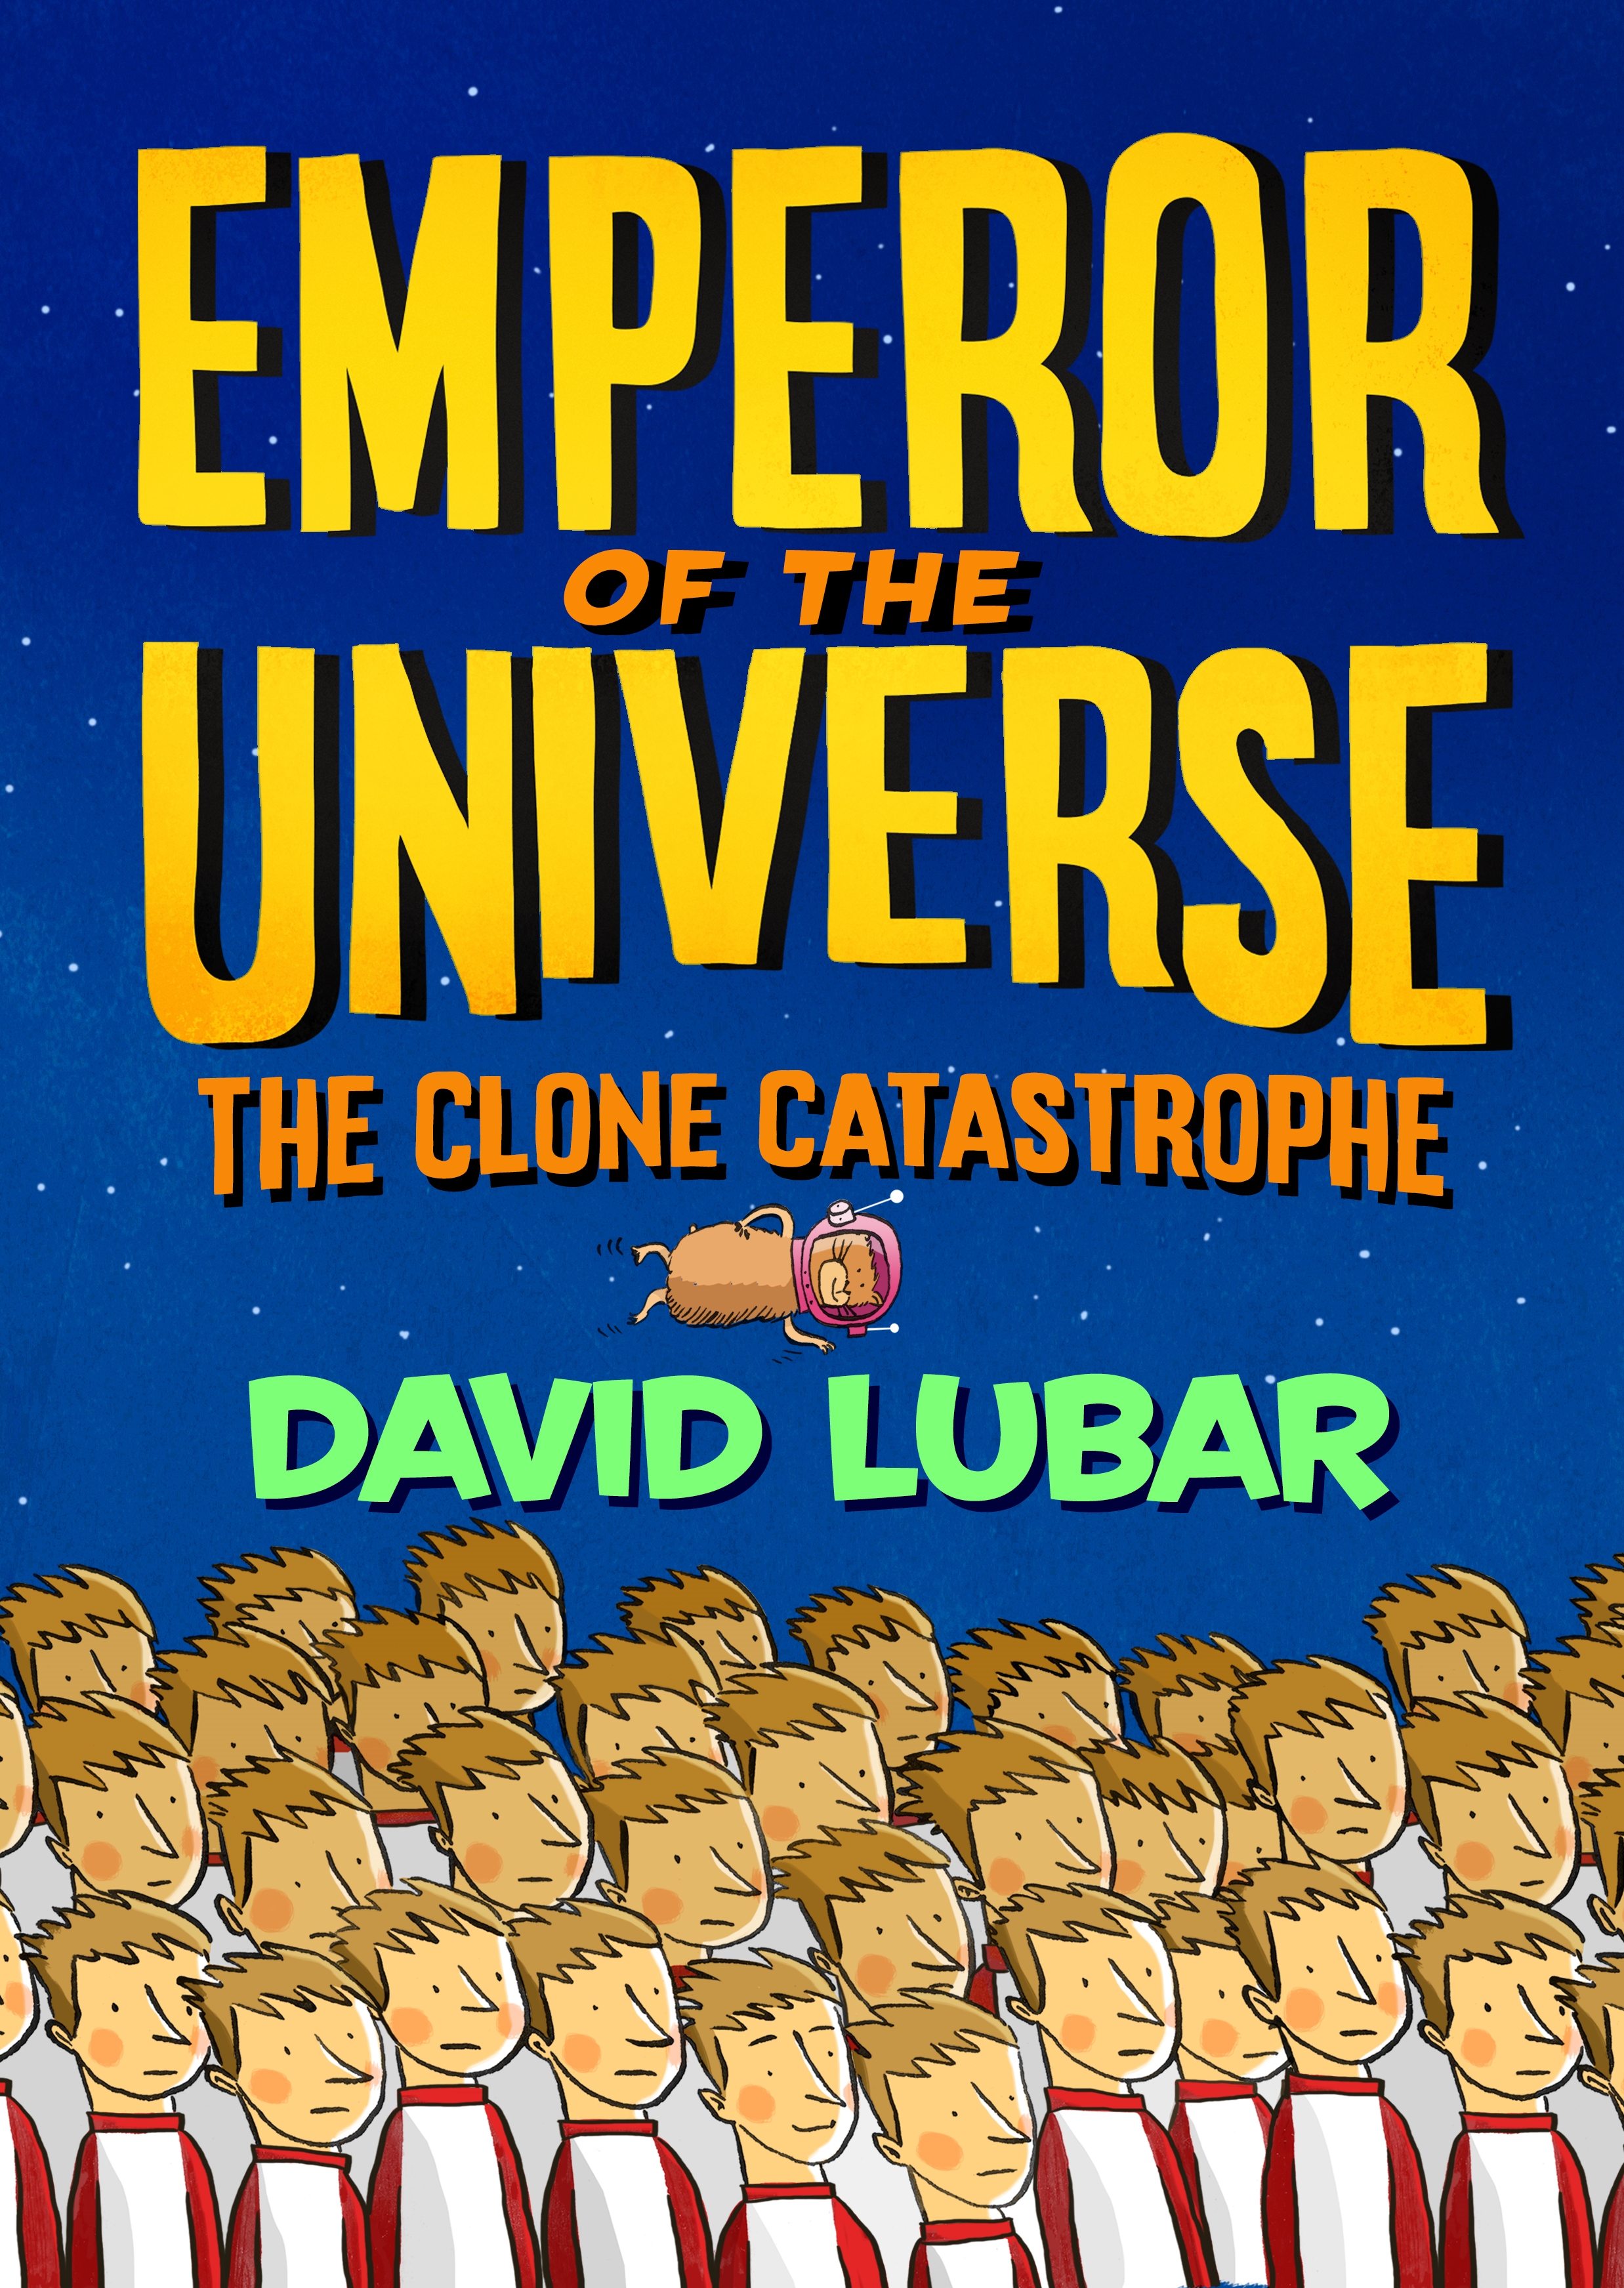 The Clone Catastrophe: Emperor of the Universe by David Lubar